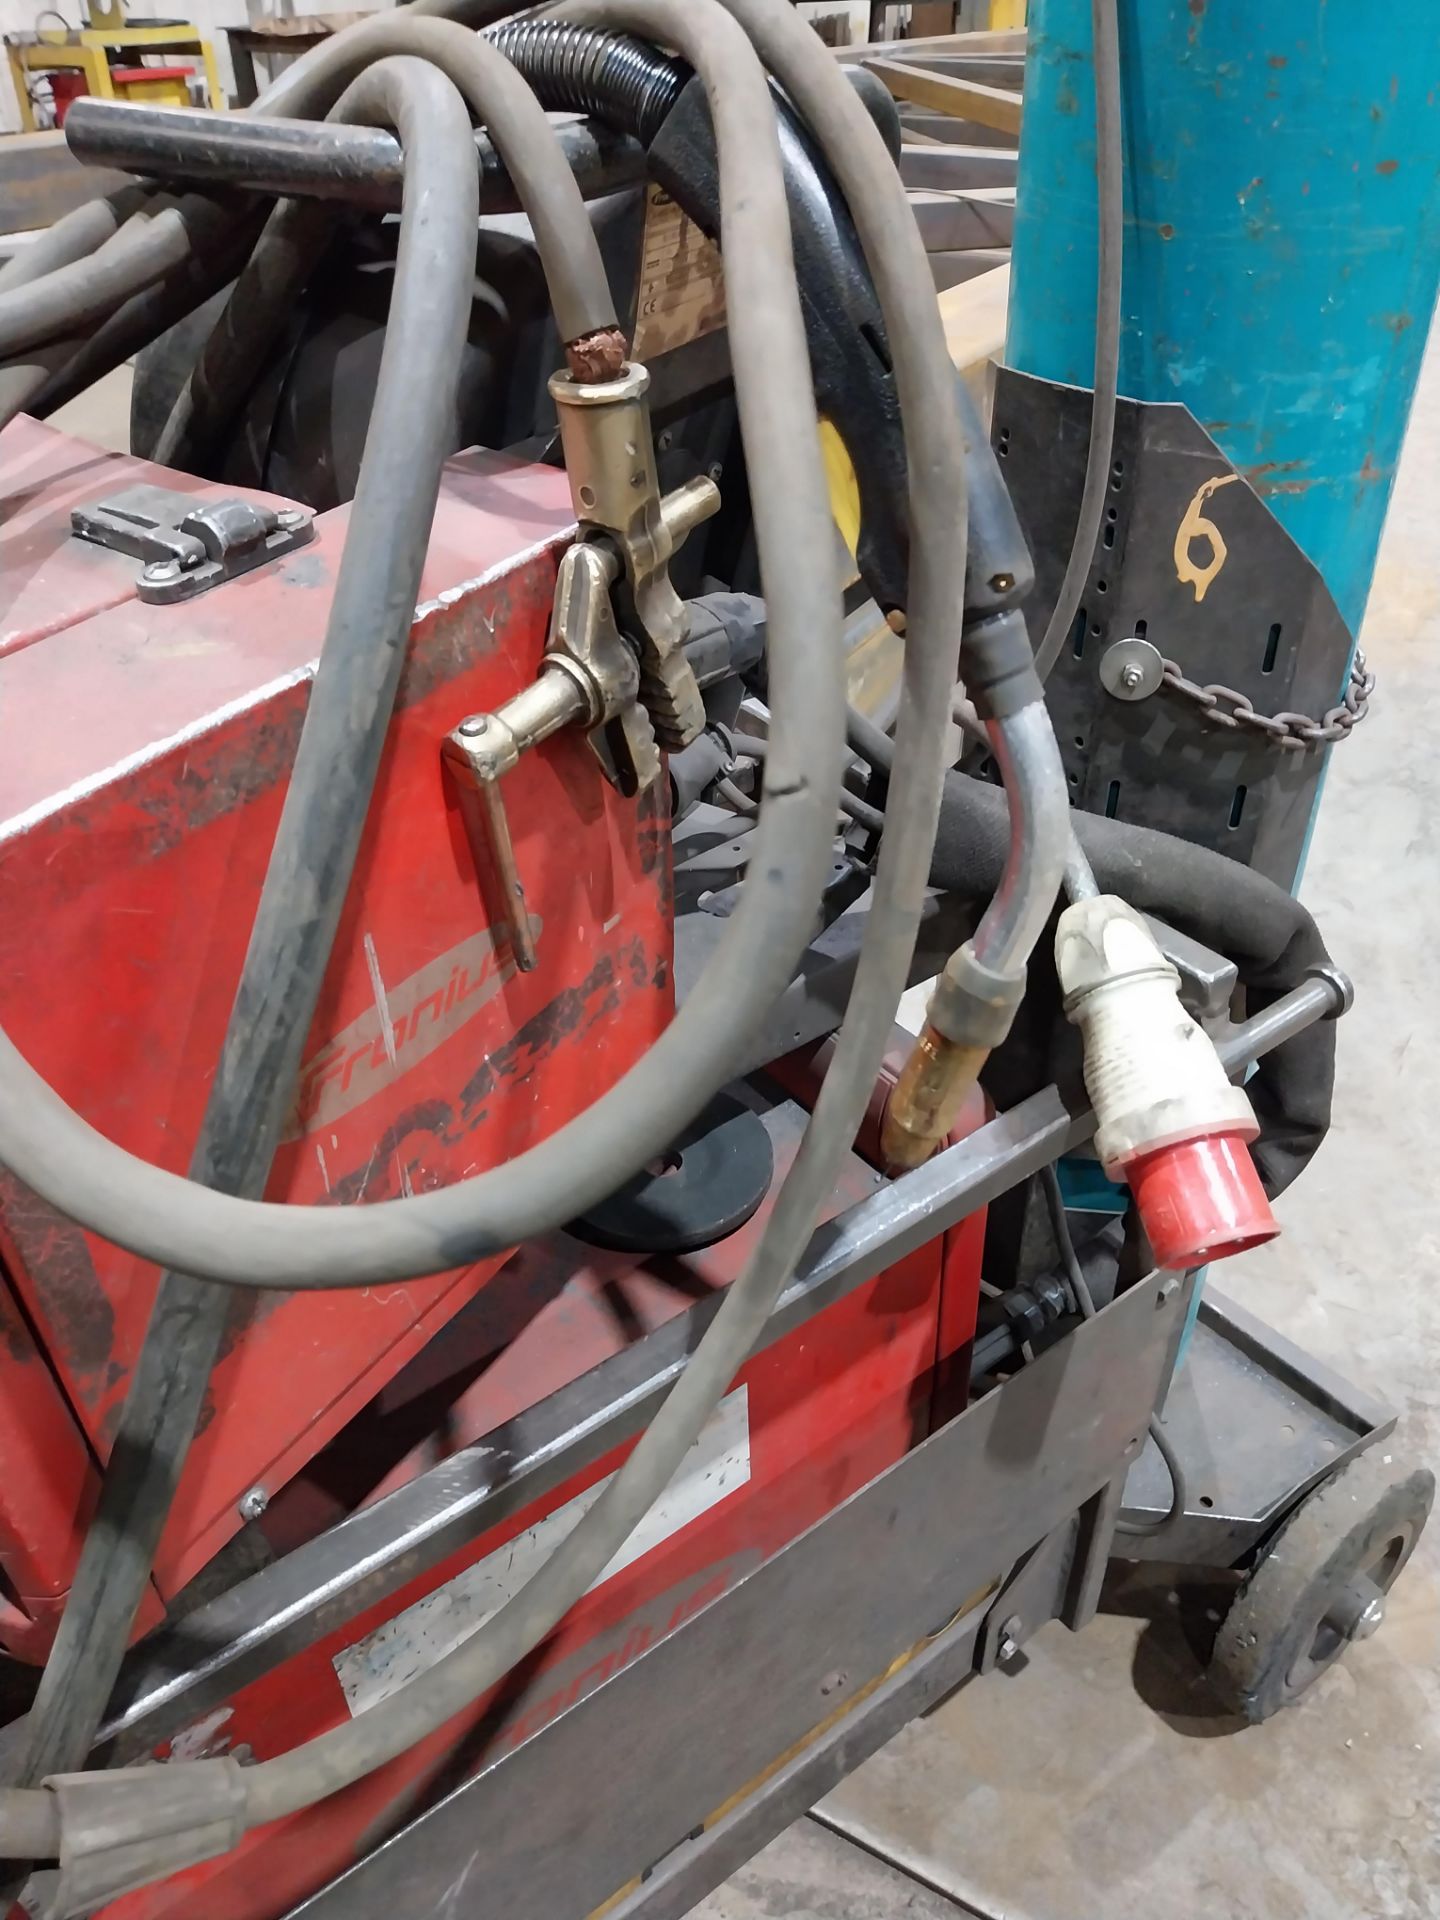 Fronius TransSynergic 4000 mig welder with VR4000 wire feed, clamp and torch (bottle not included) - Bild 5 aus 6